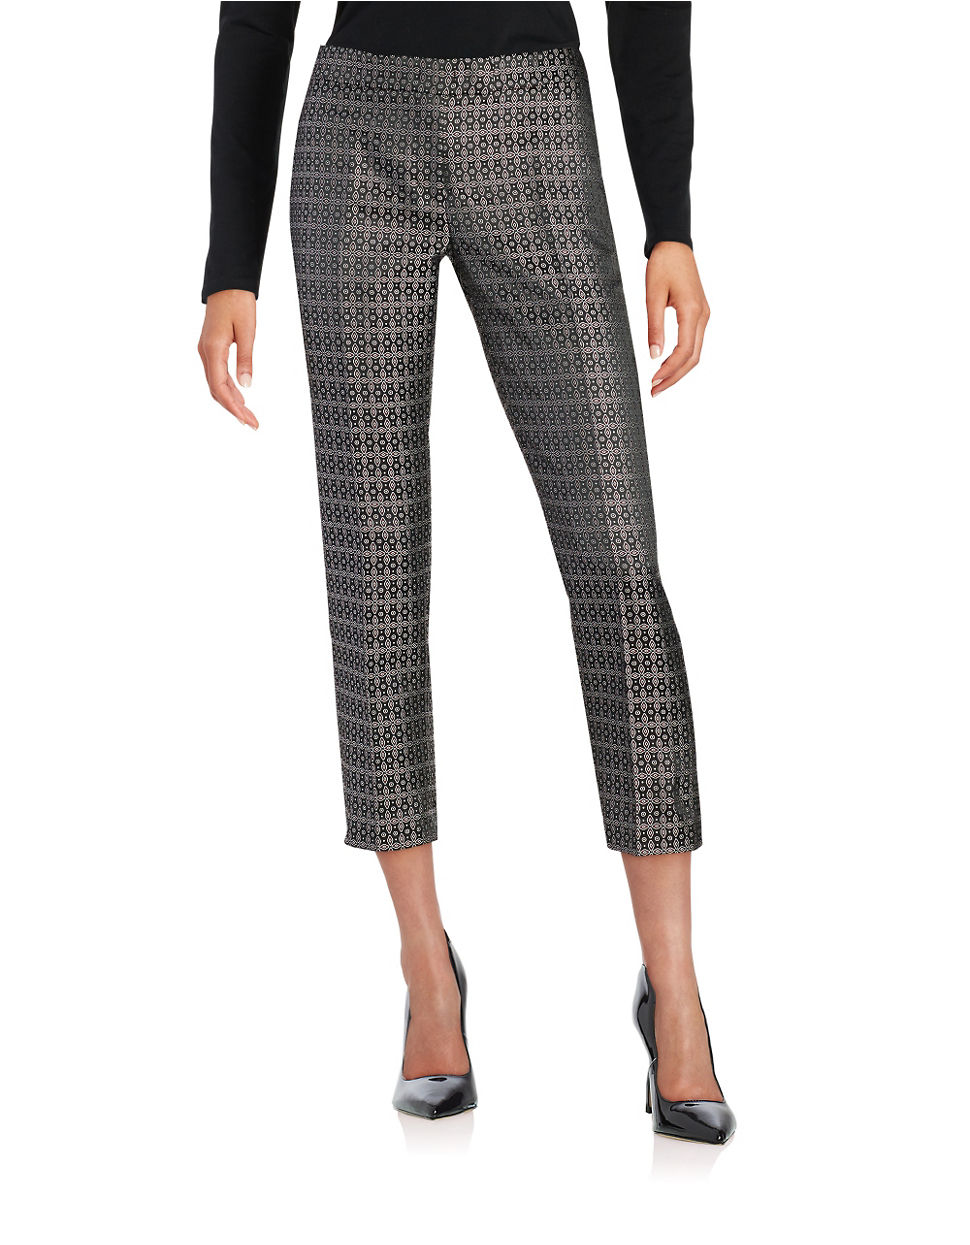 Lyst - Anne Klein Jaquard Cropped Pants in Gray